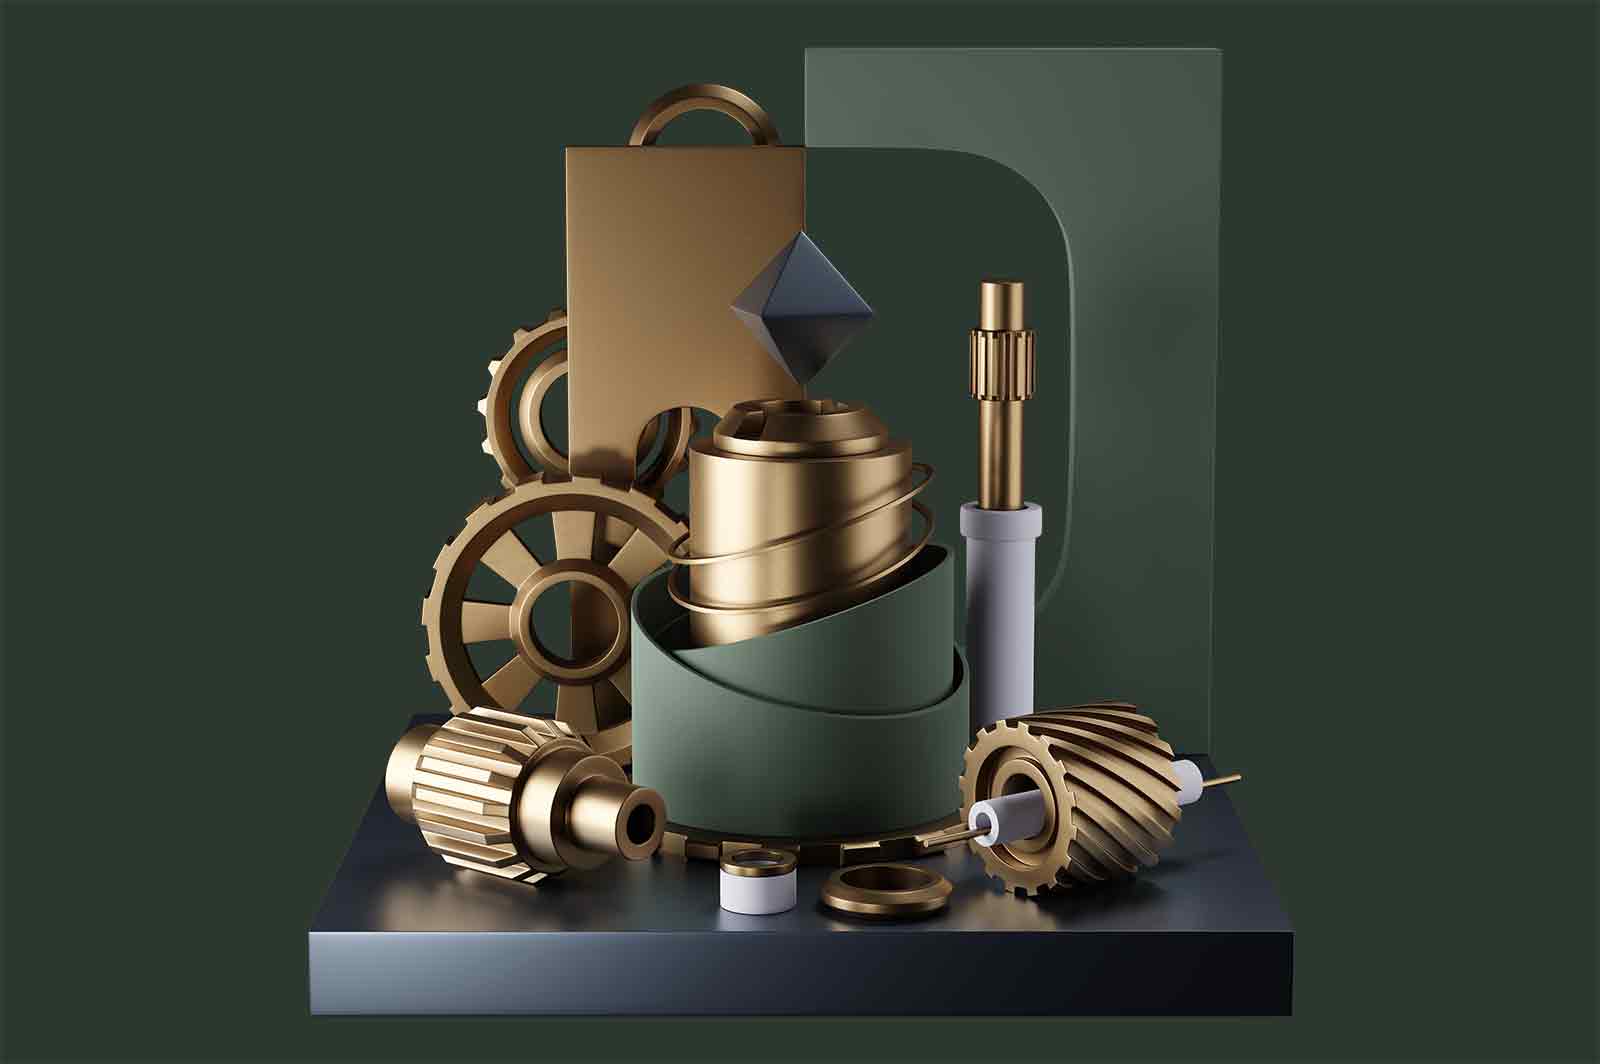 Abstract composition of wheels, gears and rings details on dark stand 3d rendered illustration. Ceramic and metal components of mechanism concept